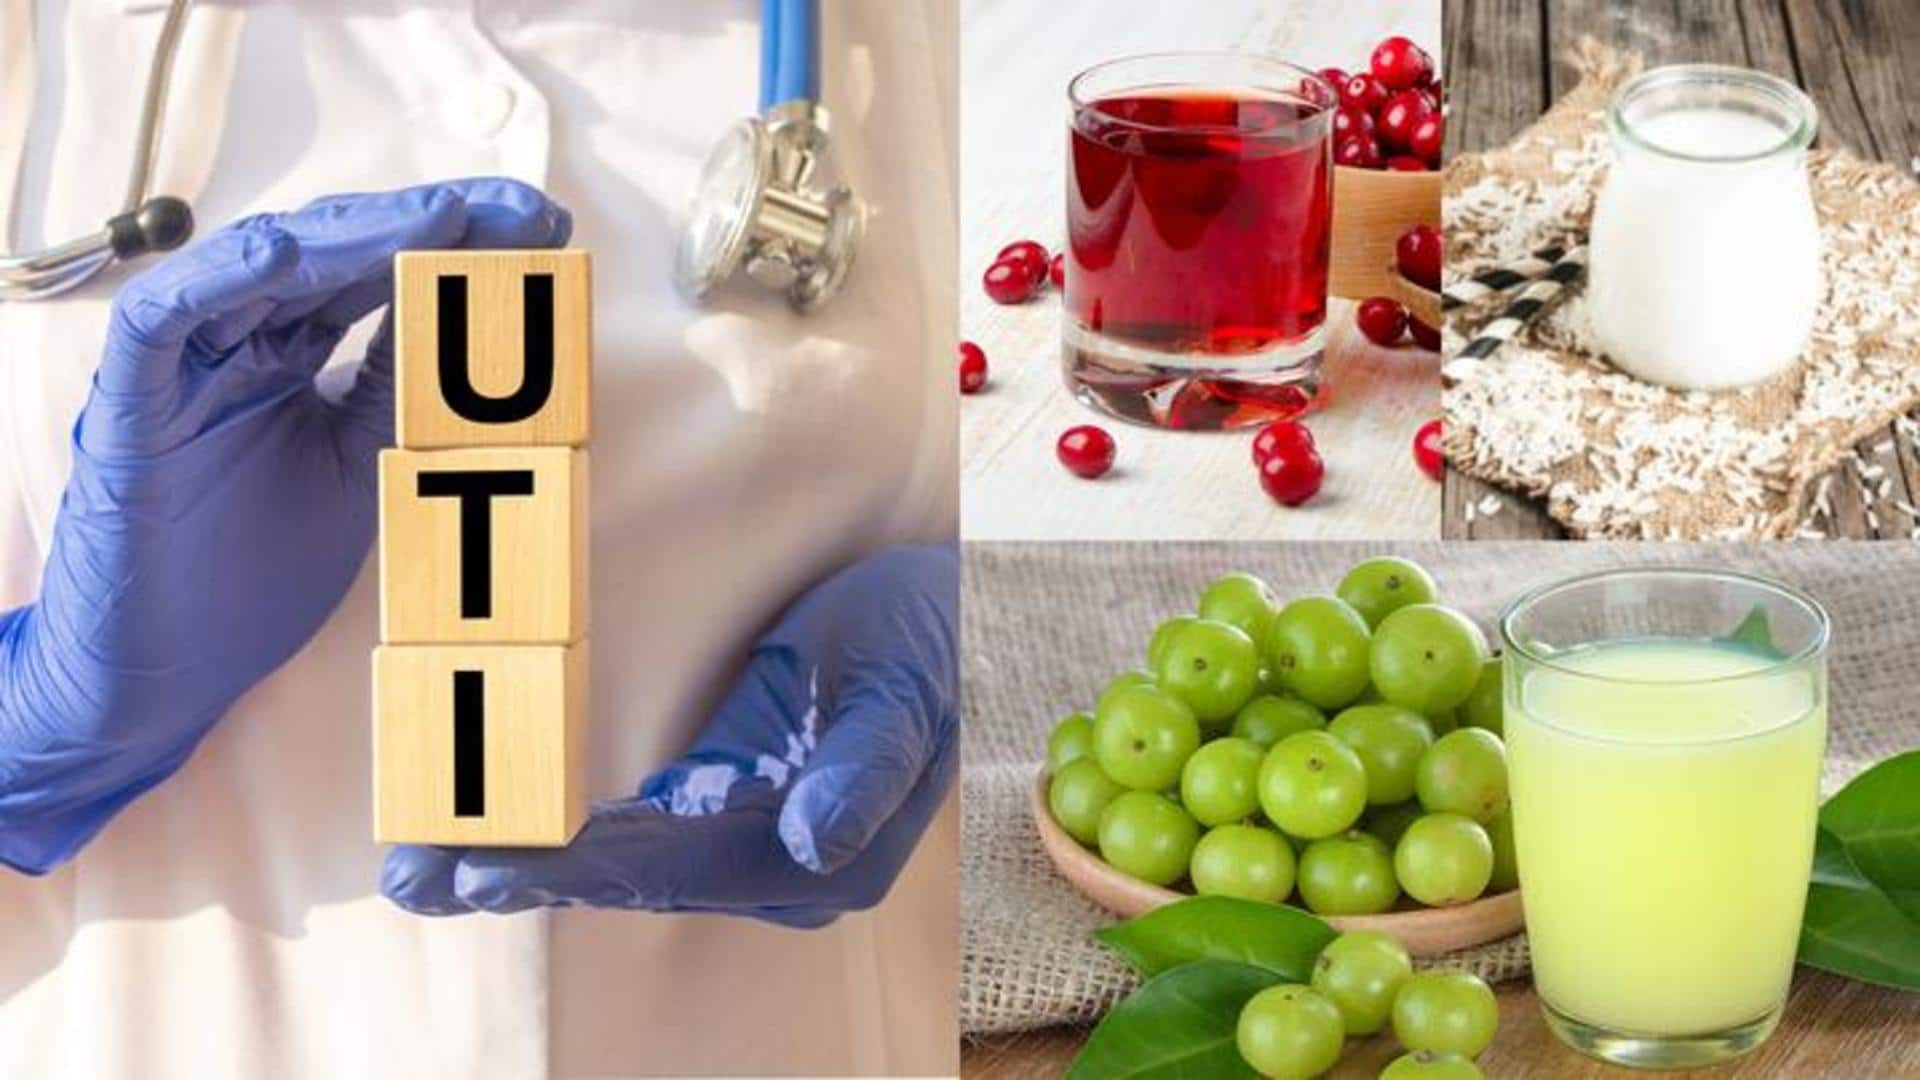 Suffering from UTI? Try these effective natural home remedies